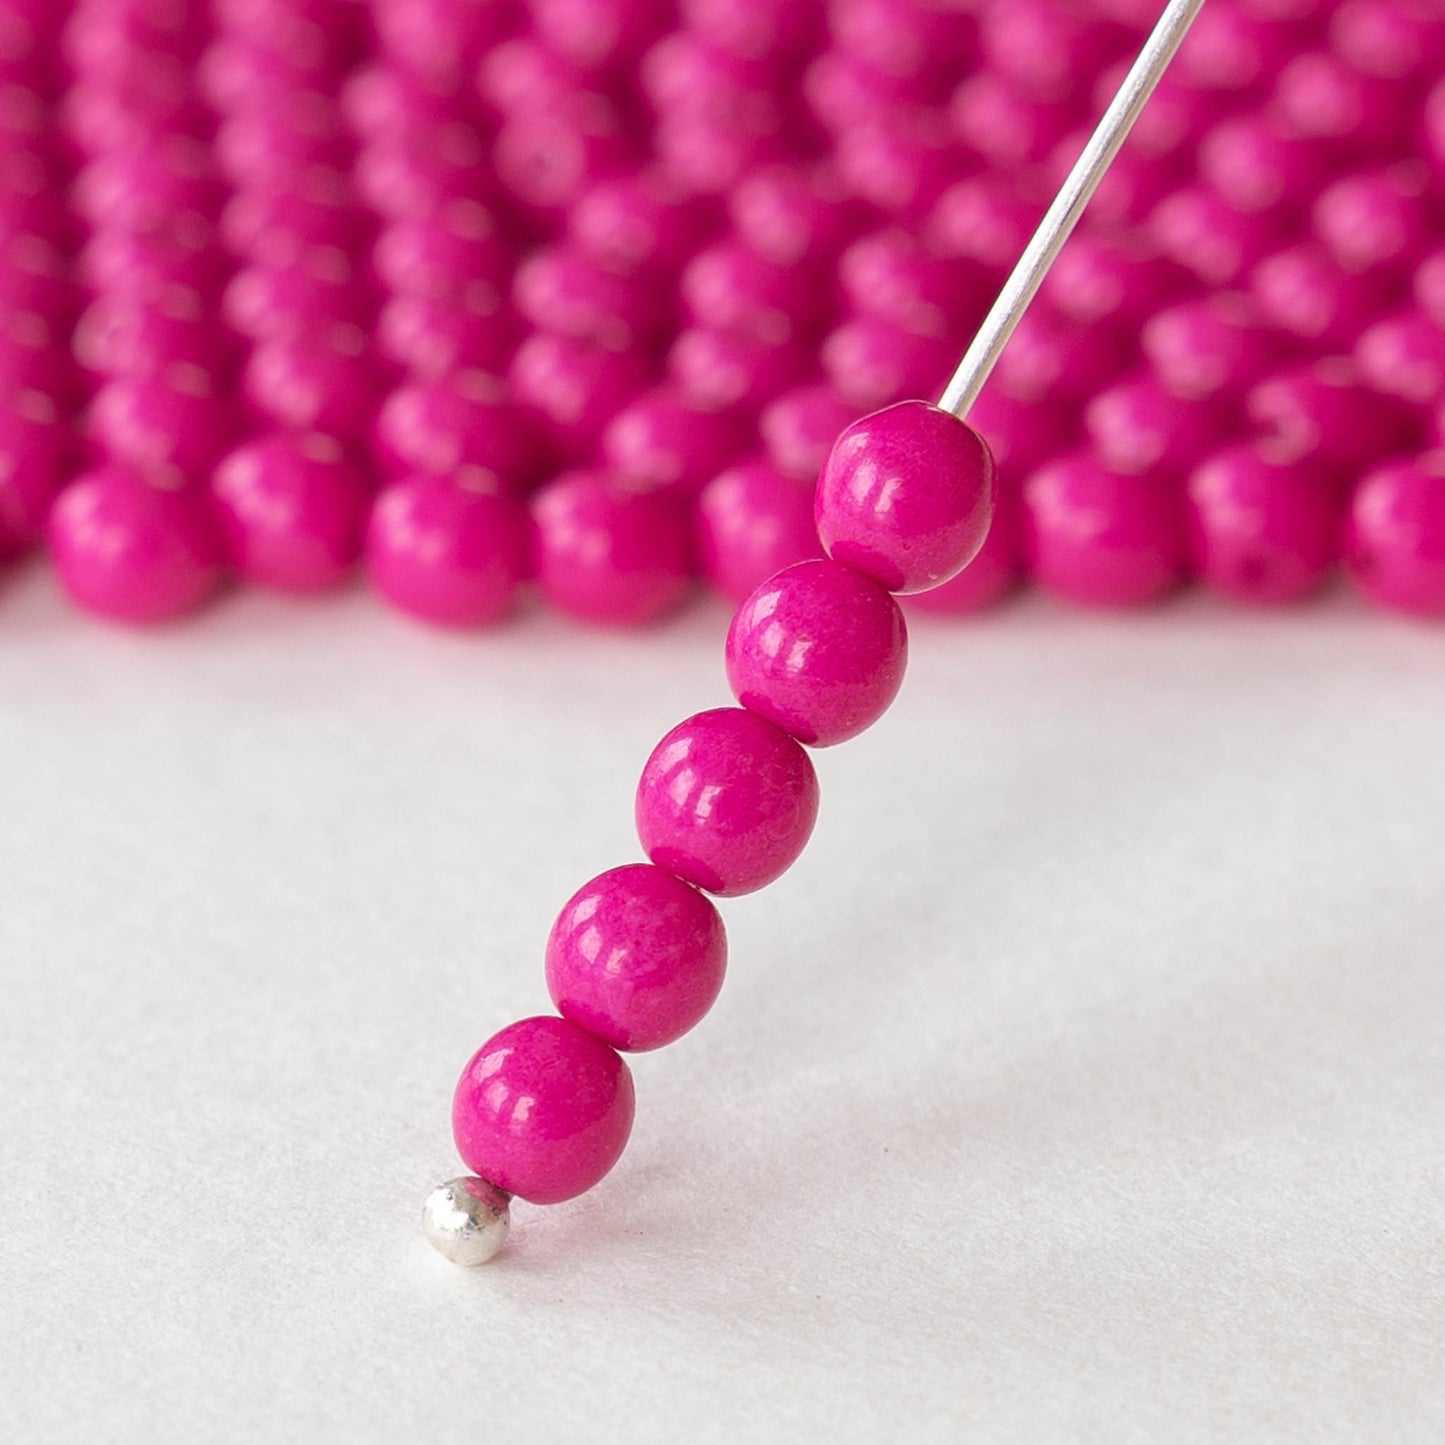 4mm Round Glass Beads - Opaque Hot Pink - 100 Beads